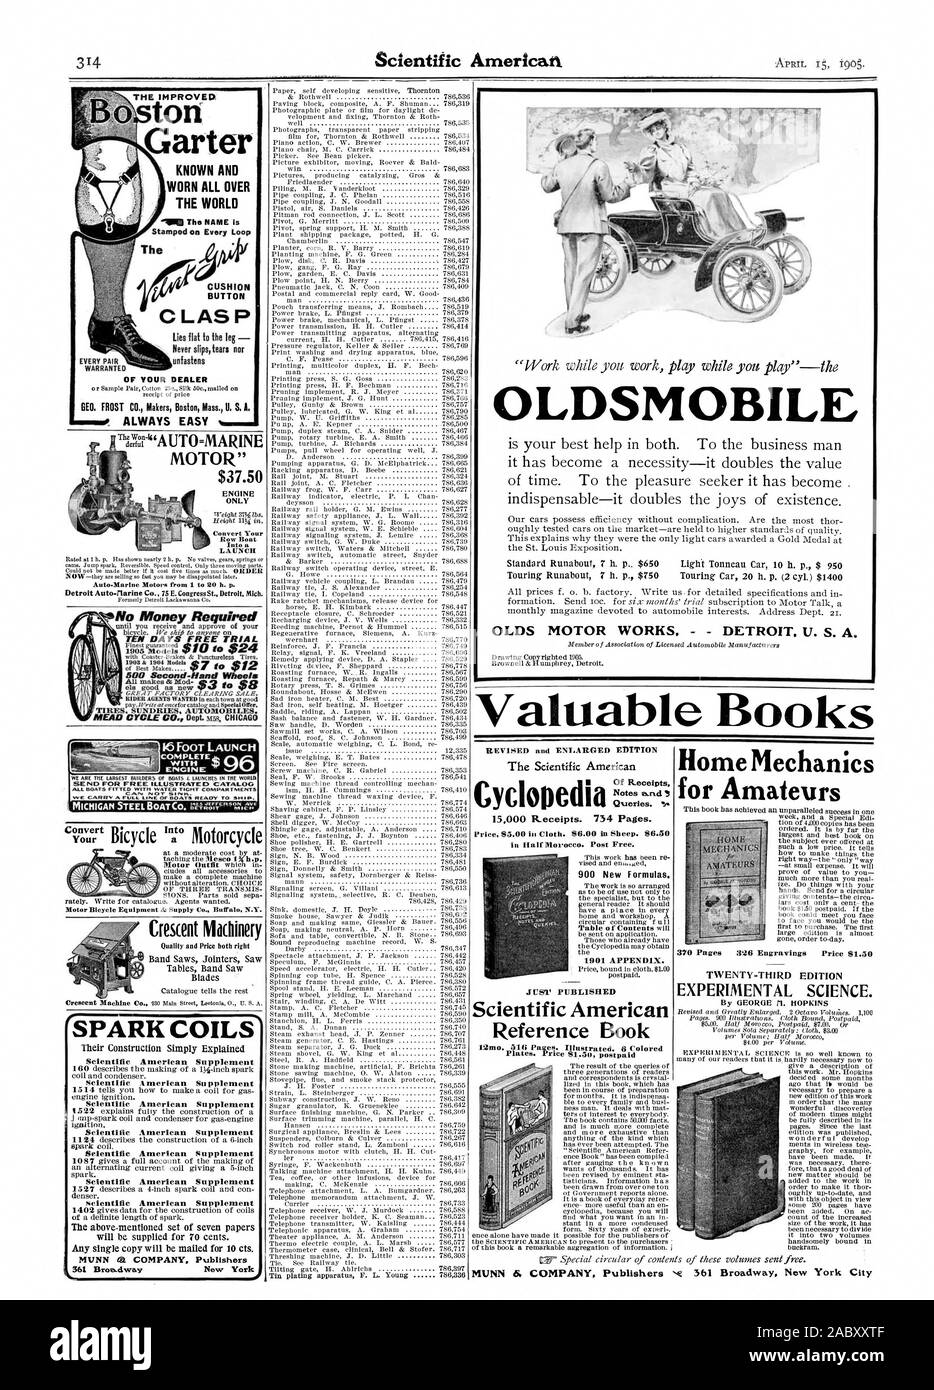 OLDSMOBILE OLDS MOTOR WORKS - DETROIT U. S. A. Valuable Books Rated at 1 h. p. Has shown nearly 2 h. p. No valves gears springs or came. Jump spark. Reversible. Speed control. Only three moving parts. No Money Required TEN DATA FREE TRIAL ADO Seeend-Ilerrtd Wheels GREAT FACTORY' CLEARING SALE. COMPLETE& ALL BOATS FITTED WITCI WATER TIGHT COMPARTMENTS cgot evOs Convert taching the Mesco 1 h.p. Motor Outfit whic in Crescent Machinery Band Saws Jointers Saw Tables Band Saw Blades Their Construction Simply Explained Scientific American Supplement Scientific A merican Su pplement engine ignition Stock Photo